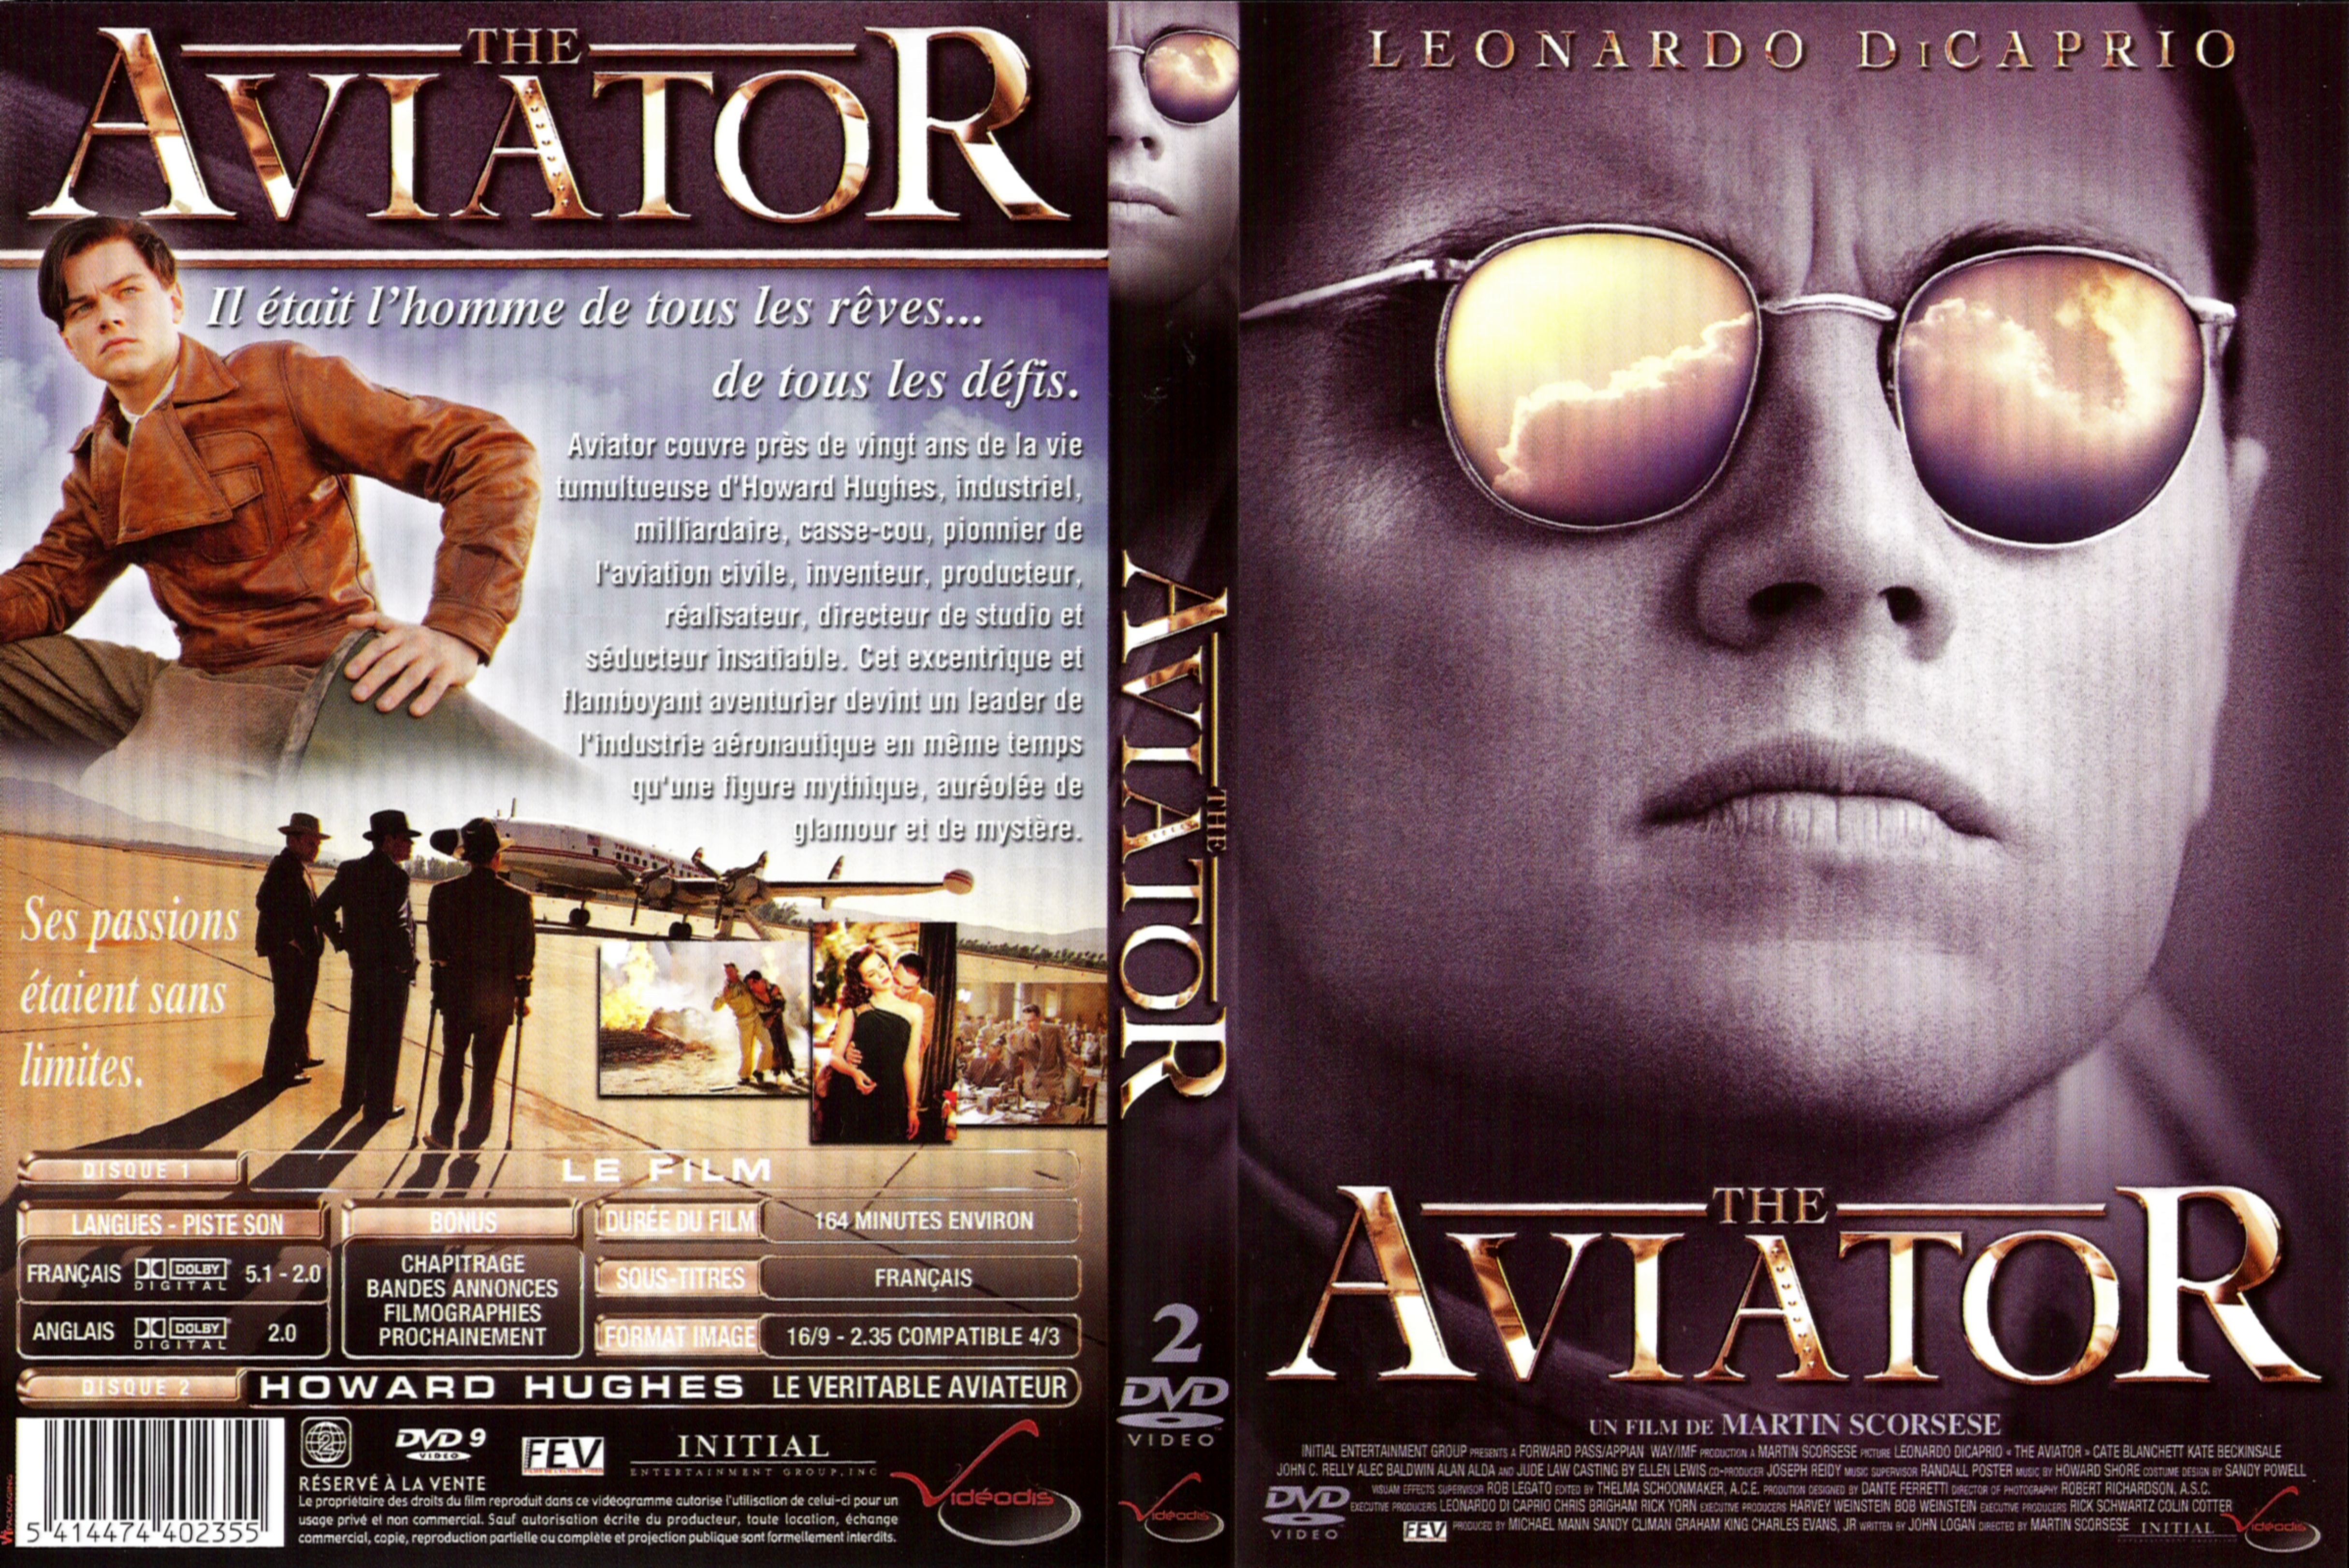 Jaquette DVD The aviator